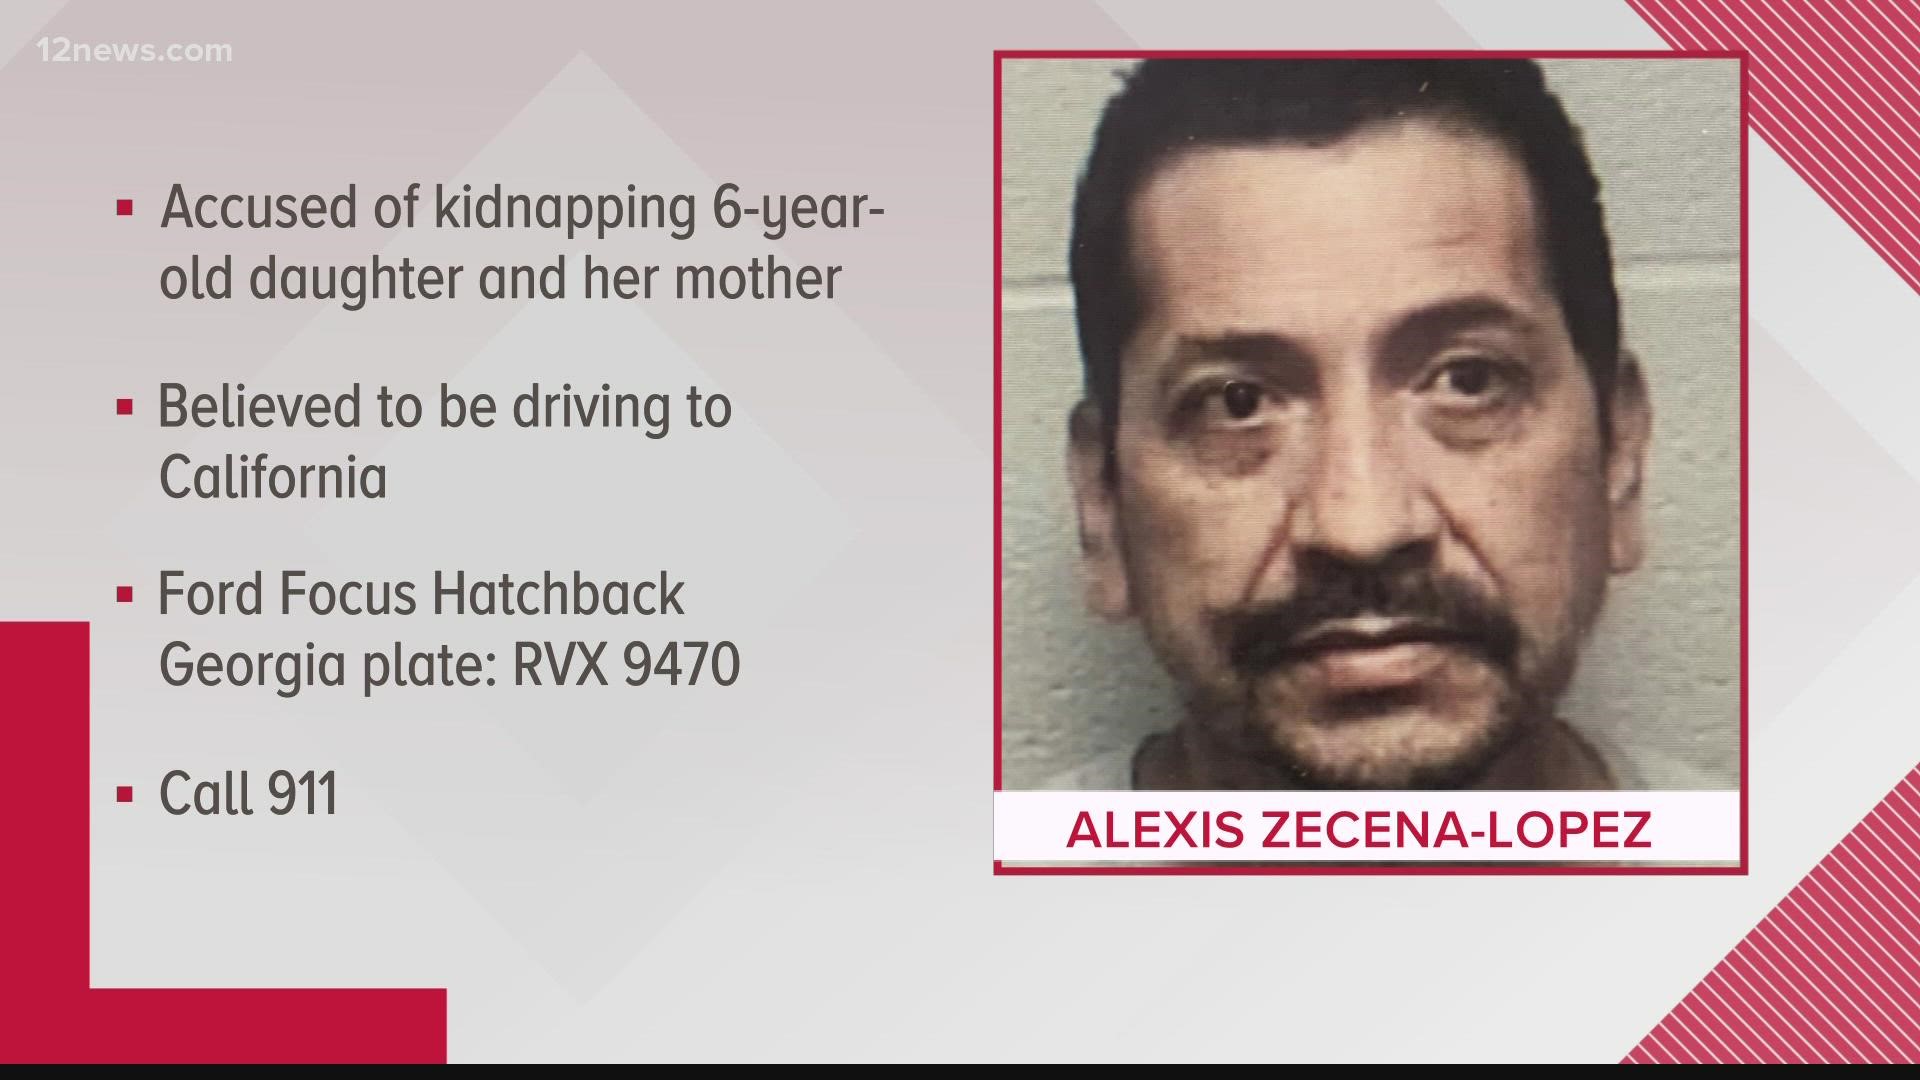 A young girl kidnapped from Georgia could be moving through Arizona as her abductor attempts to reach California, officials say